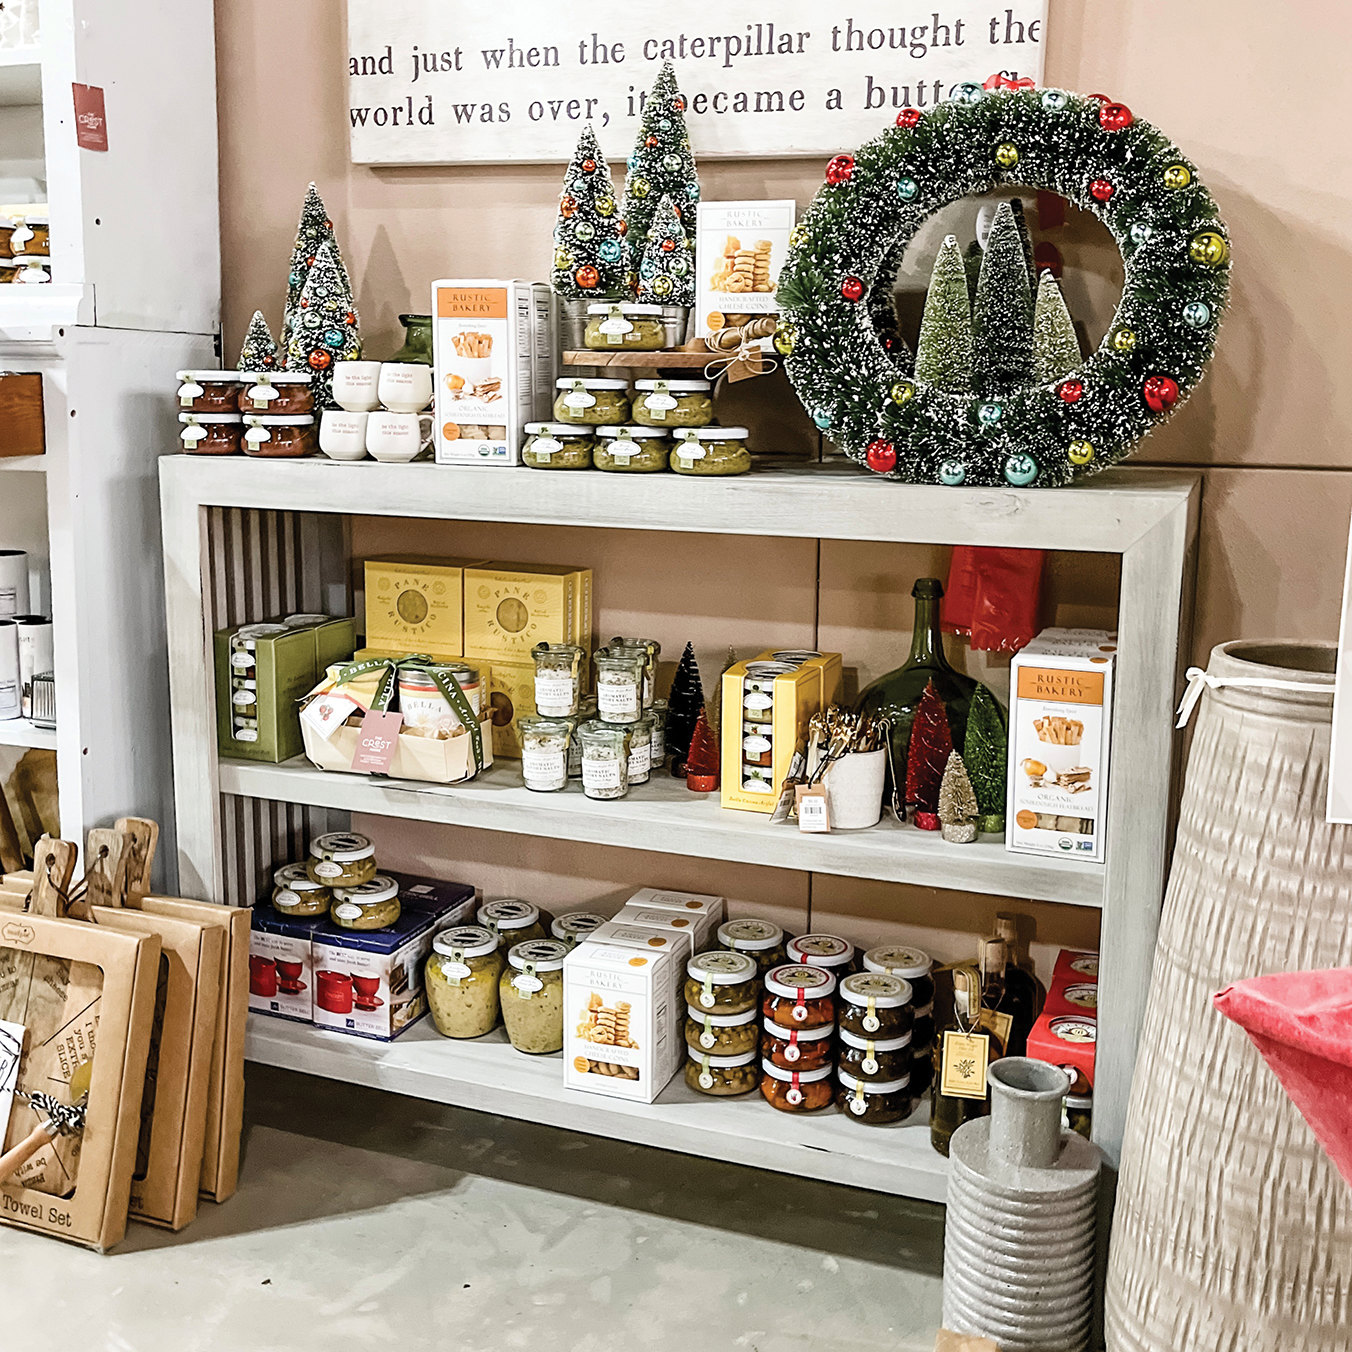 Gourmet pantry items make great gifts. Photo courtesy of Paper Luxe.